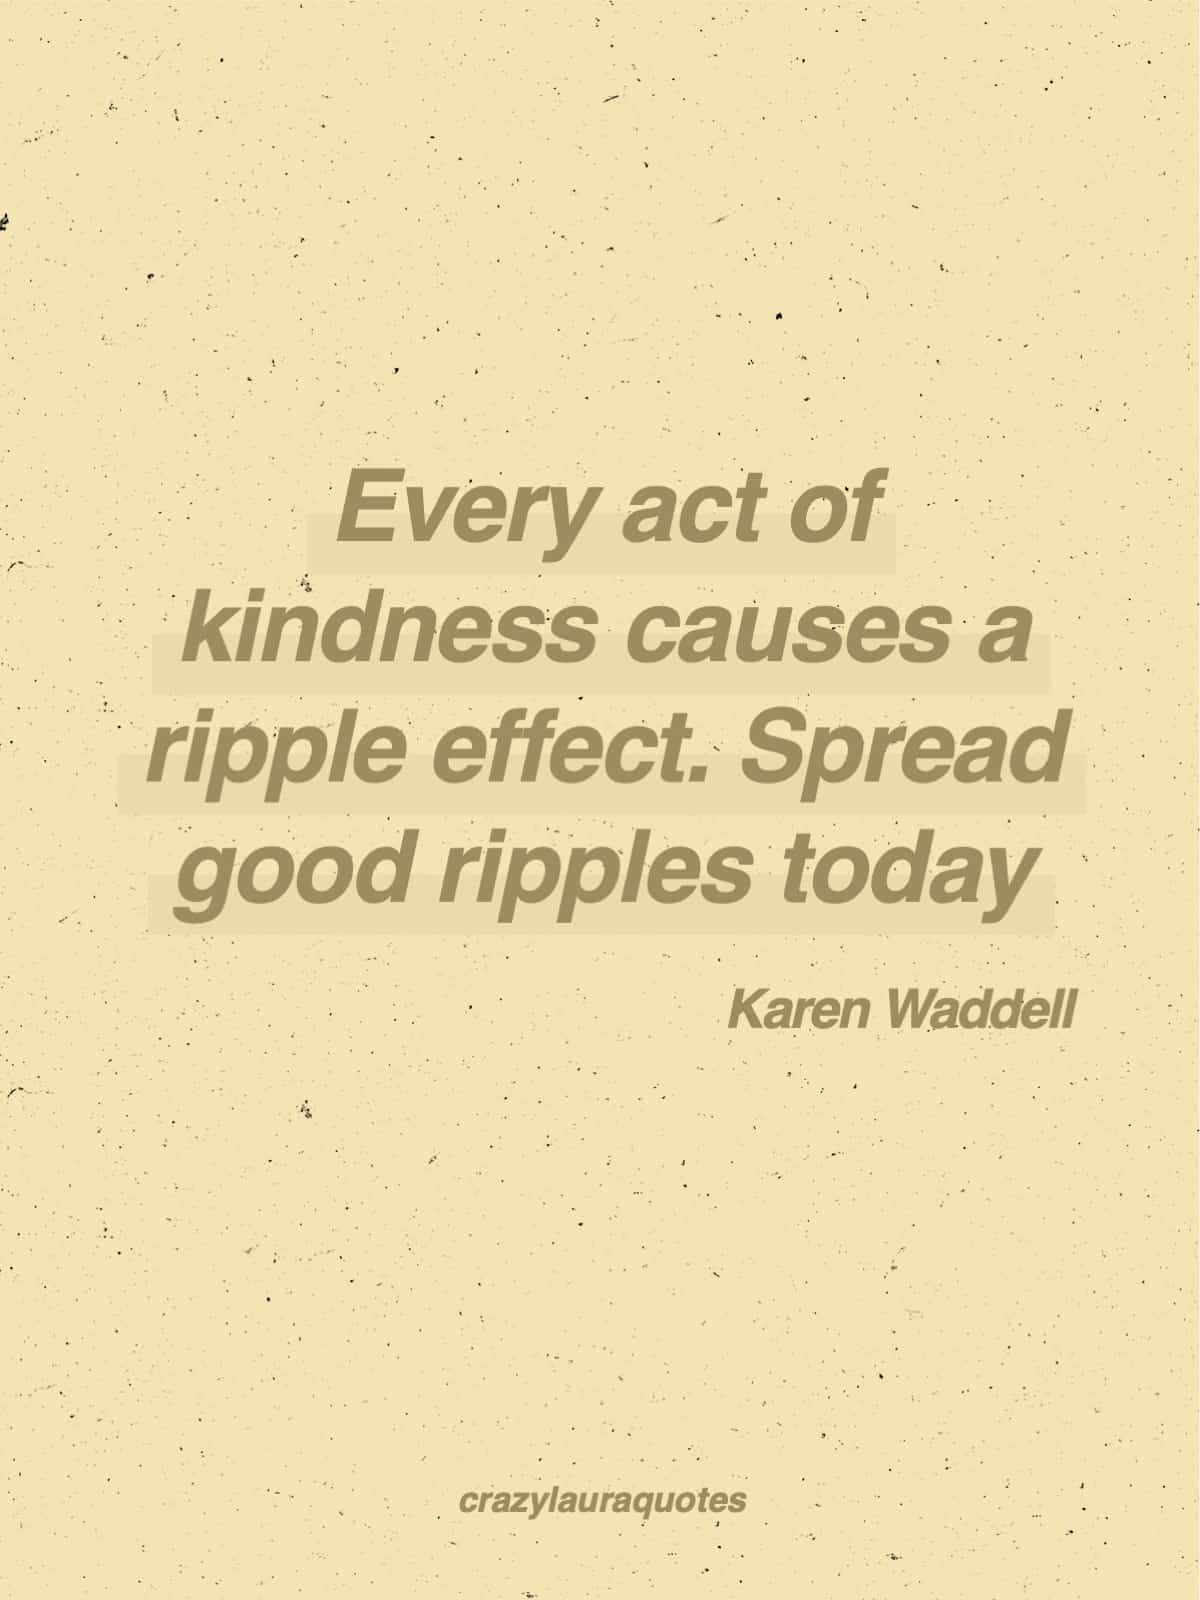 kindness ripples through the world quote